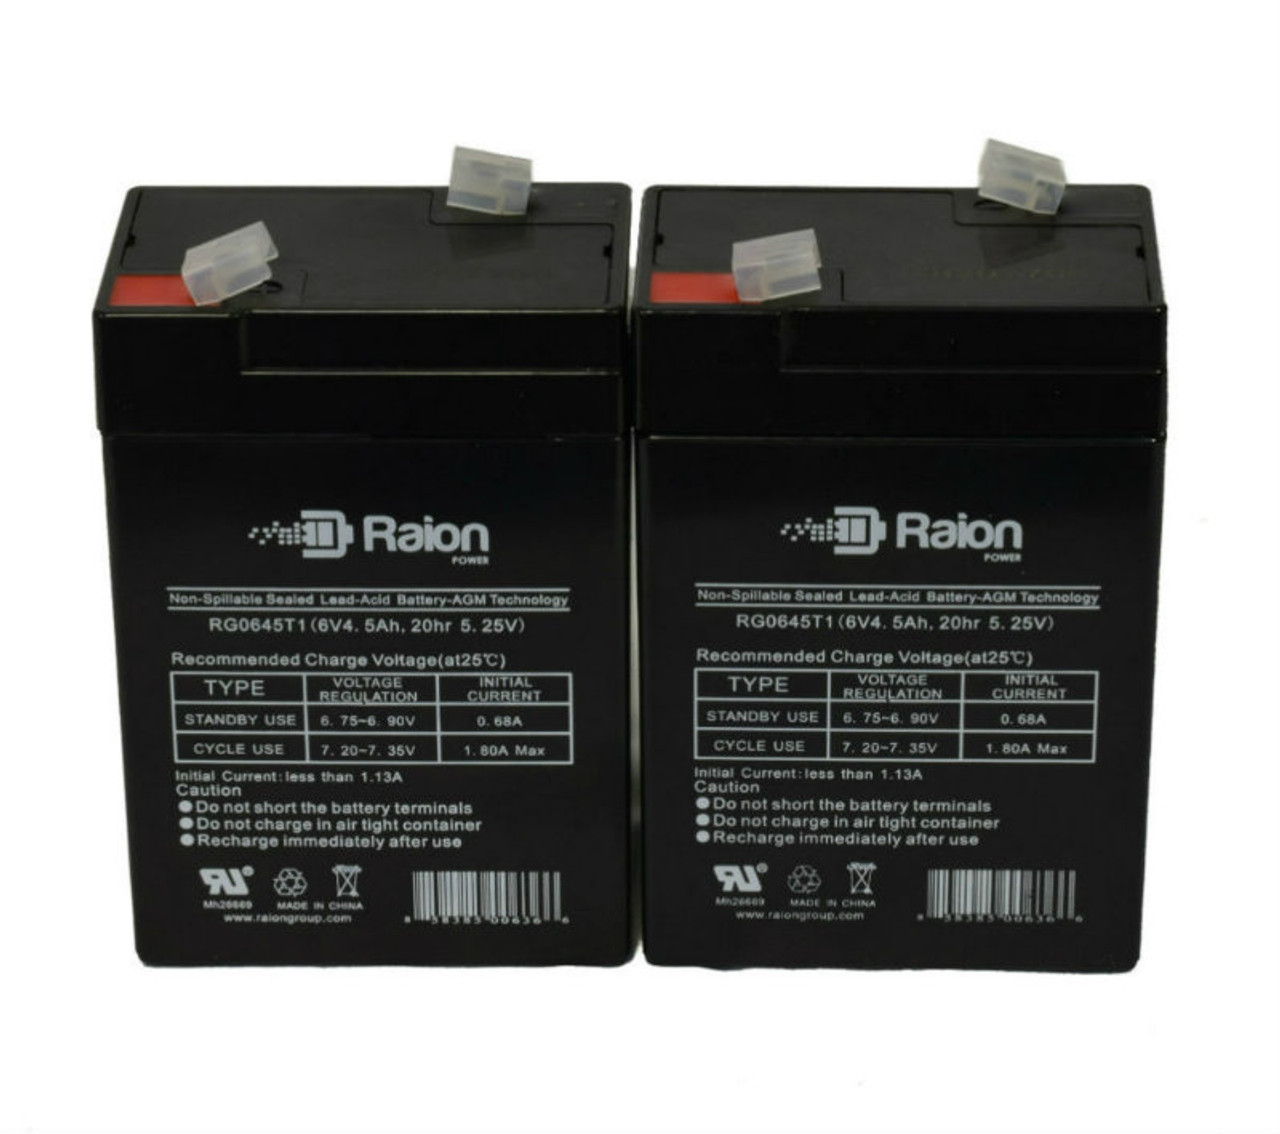 Raion Power RG0645T1 6V 4.5Ah Replacement Battery Cartridge for TOBBI 12V Bentley Electric Kids Ride On Racer Car Toy - 2 Pack